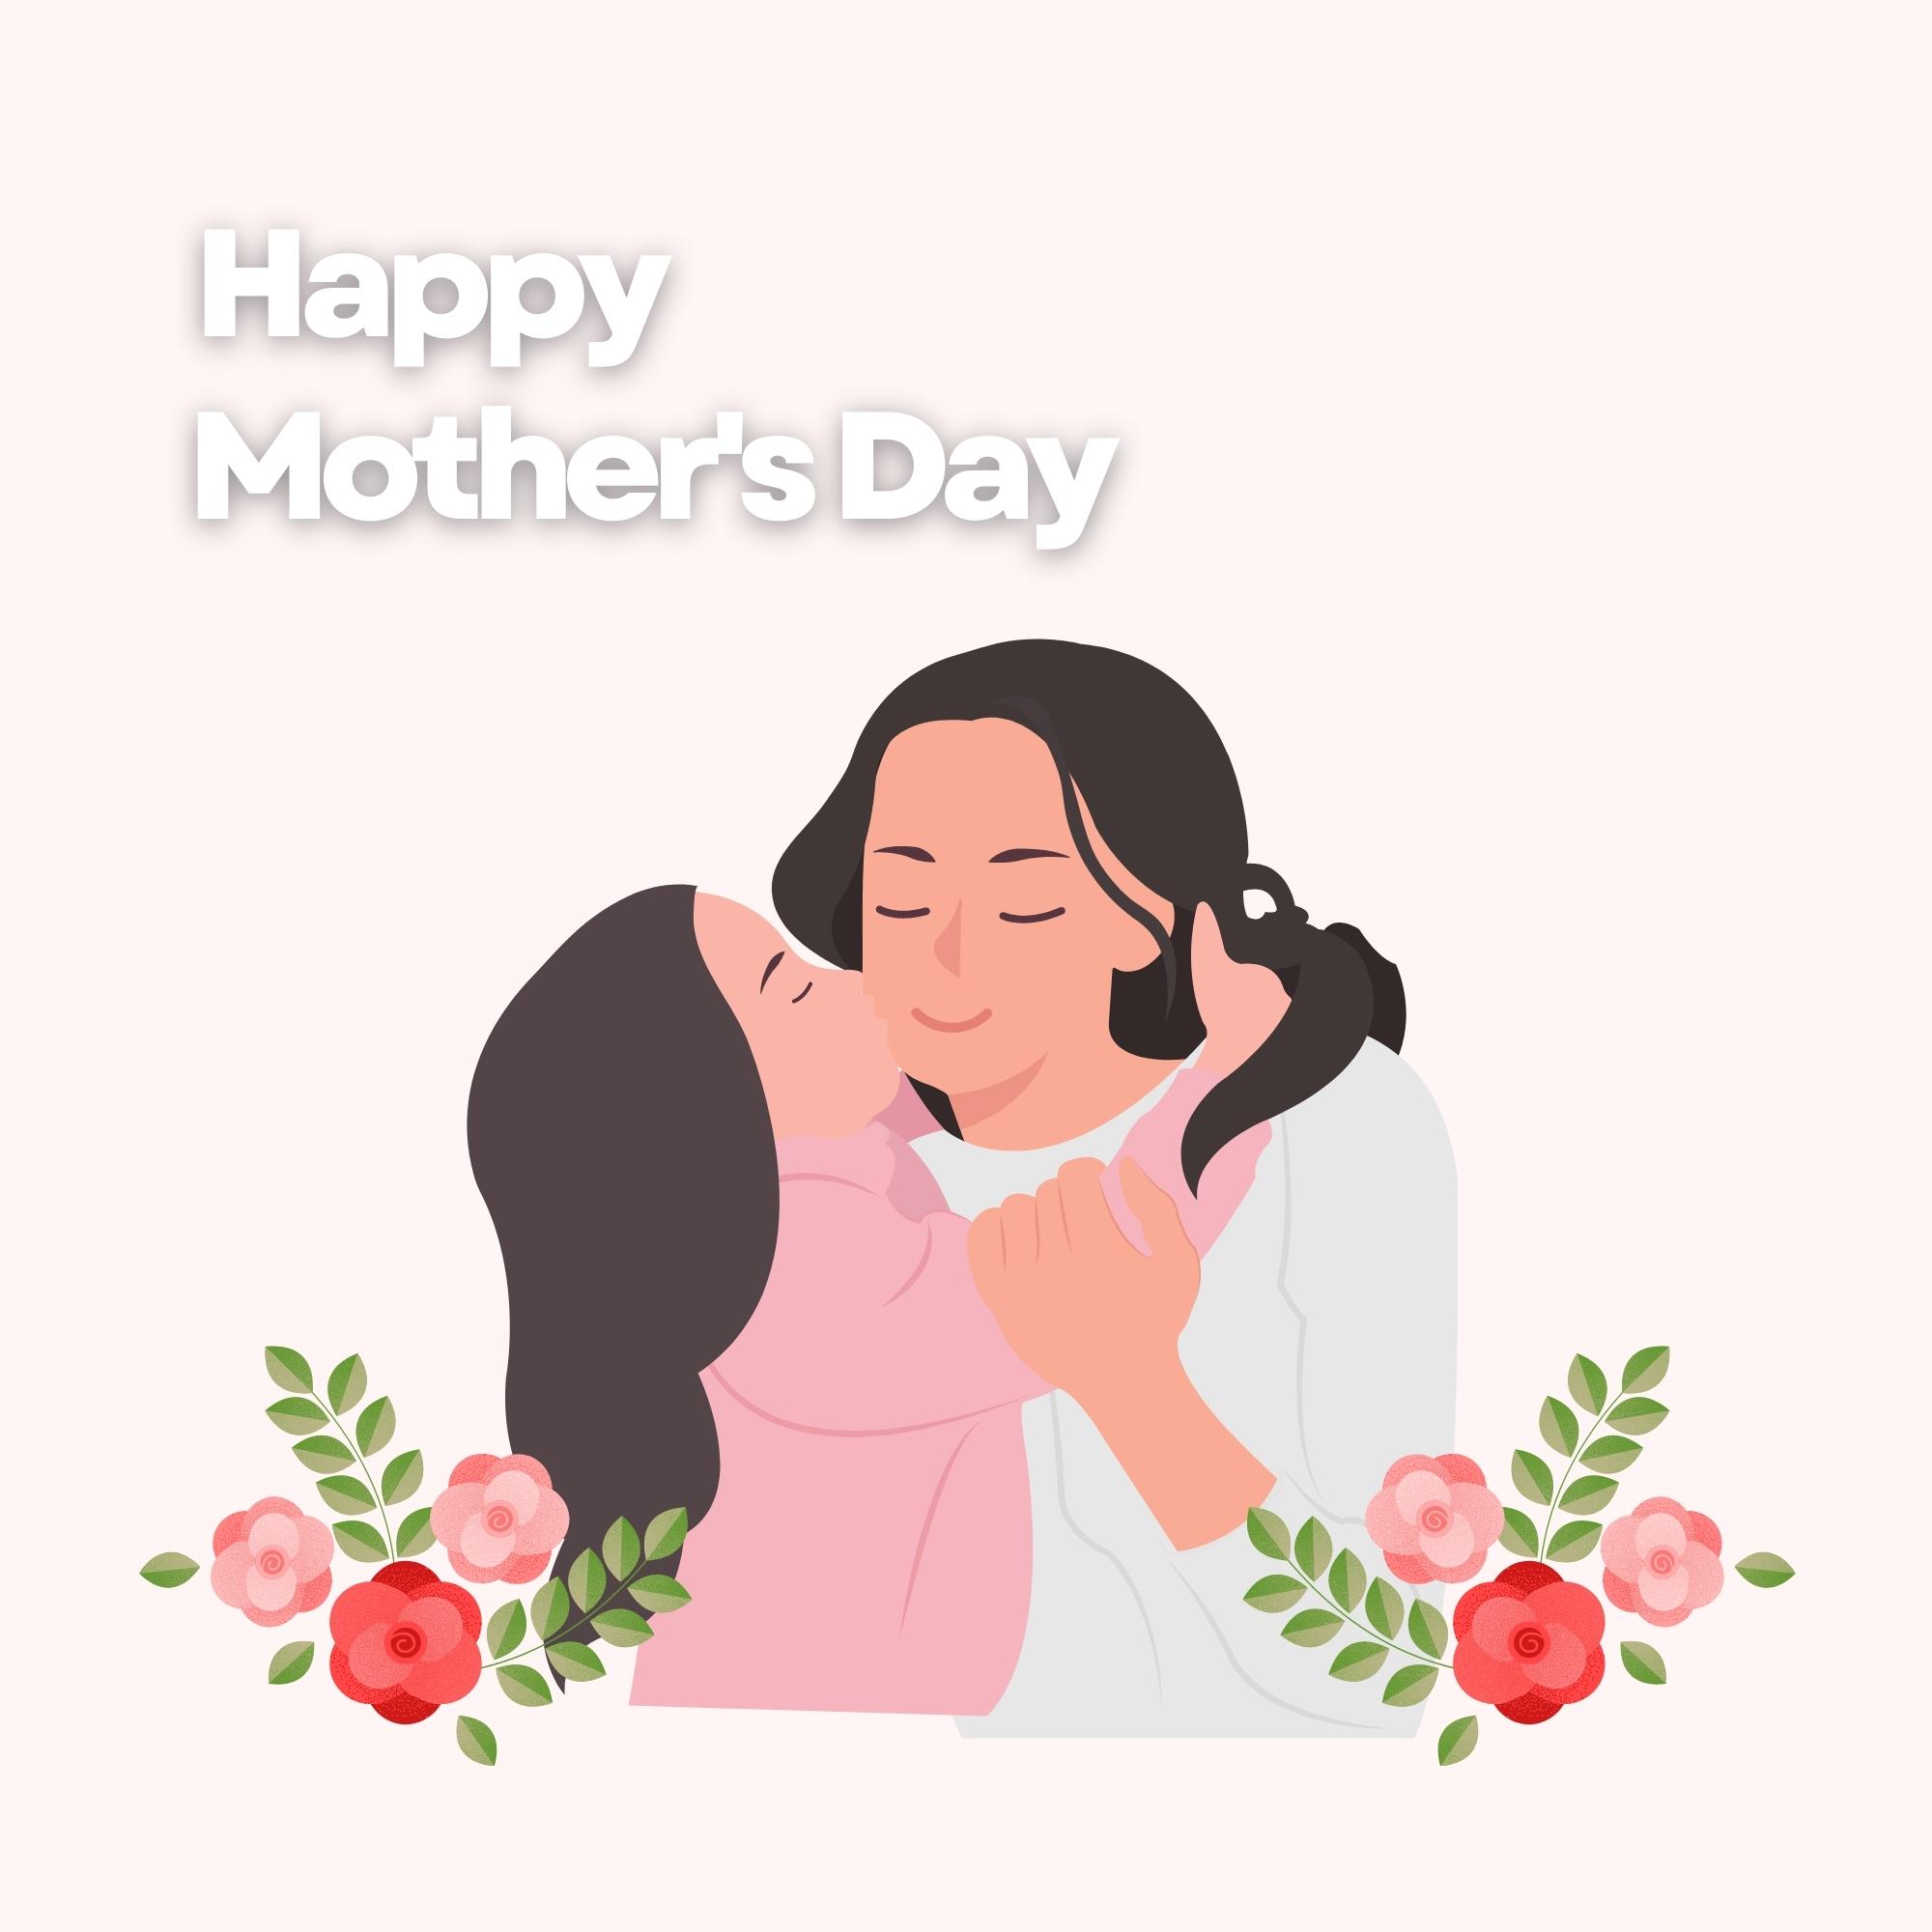 Happy Mothers Day Images | 1022 | Free Download [8k,4k,Hd]